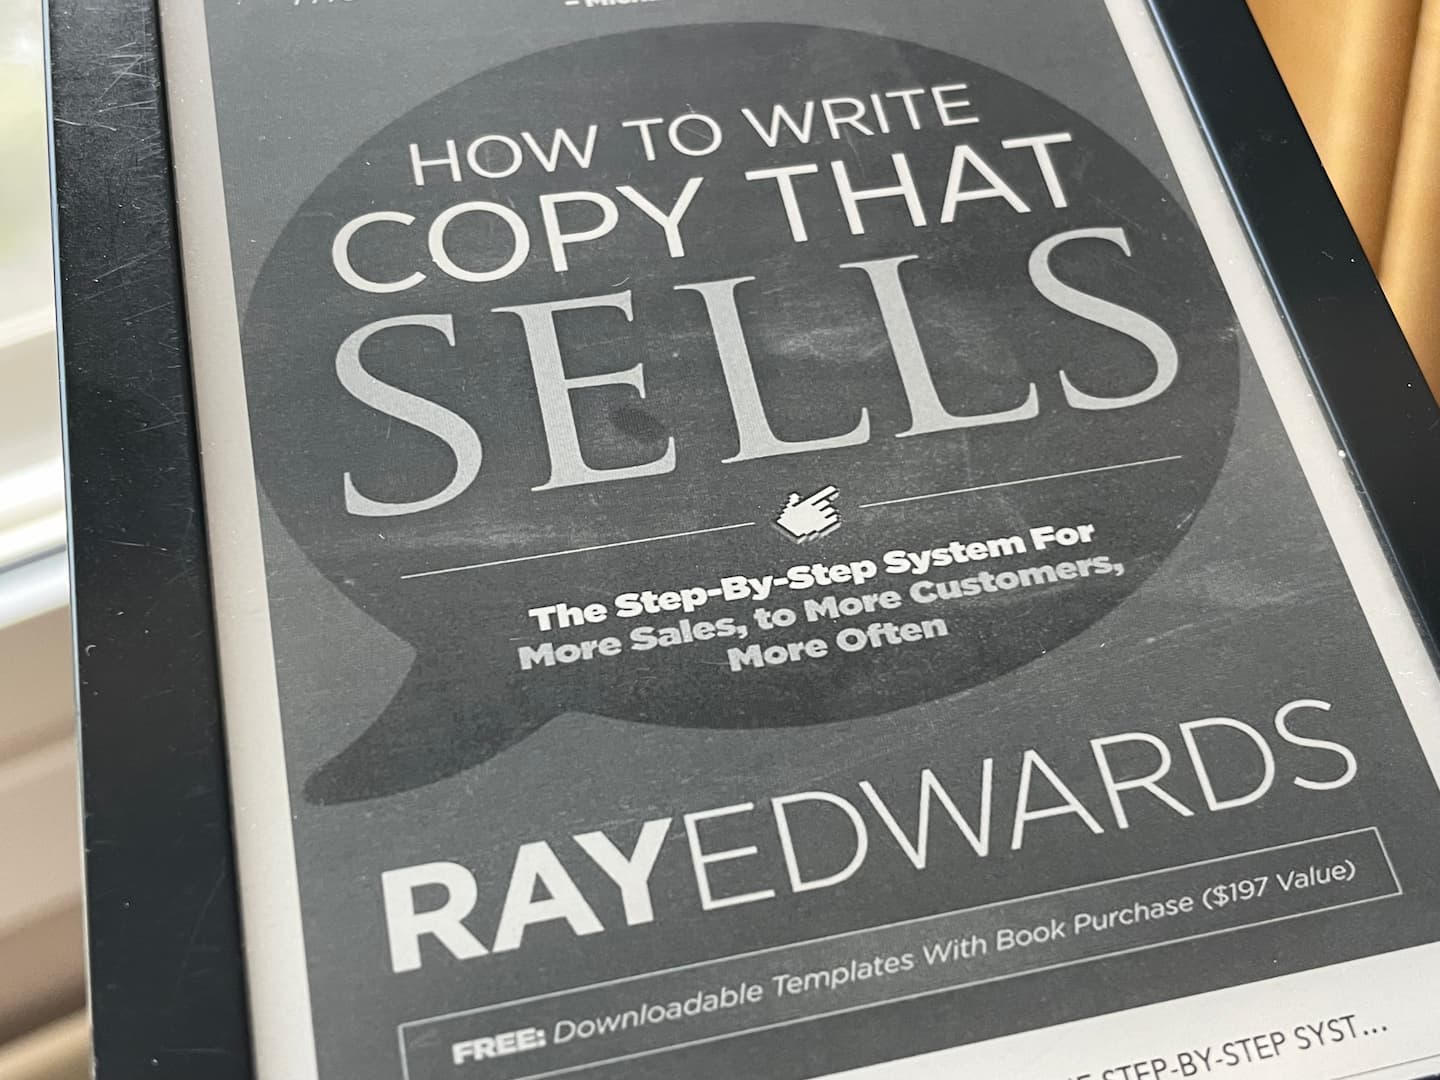 Review: “How to Write Copy That Sells" by Ray Edwards